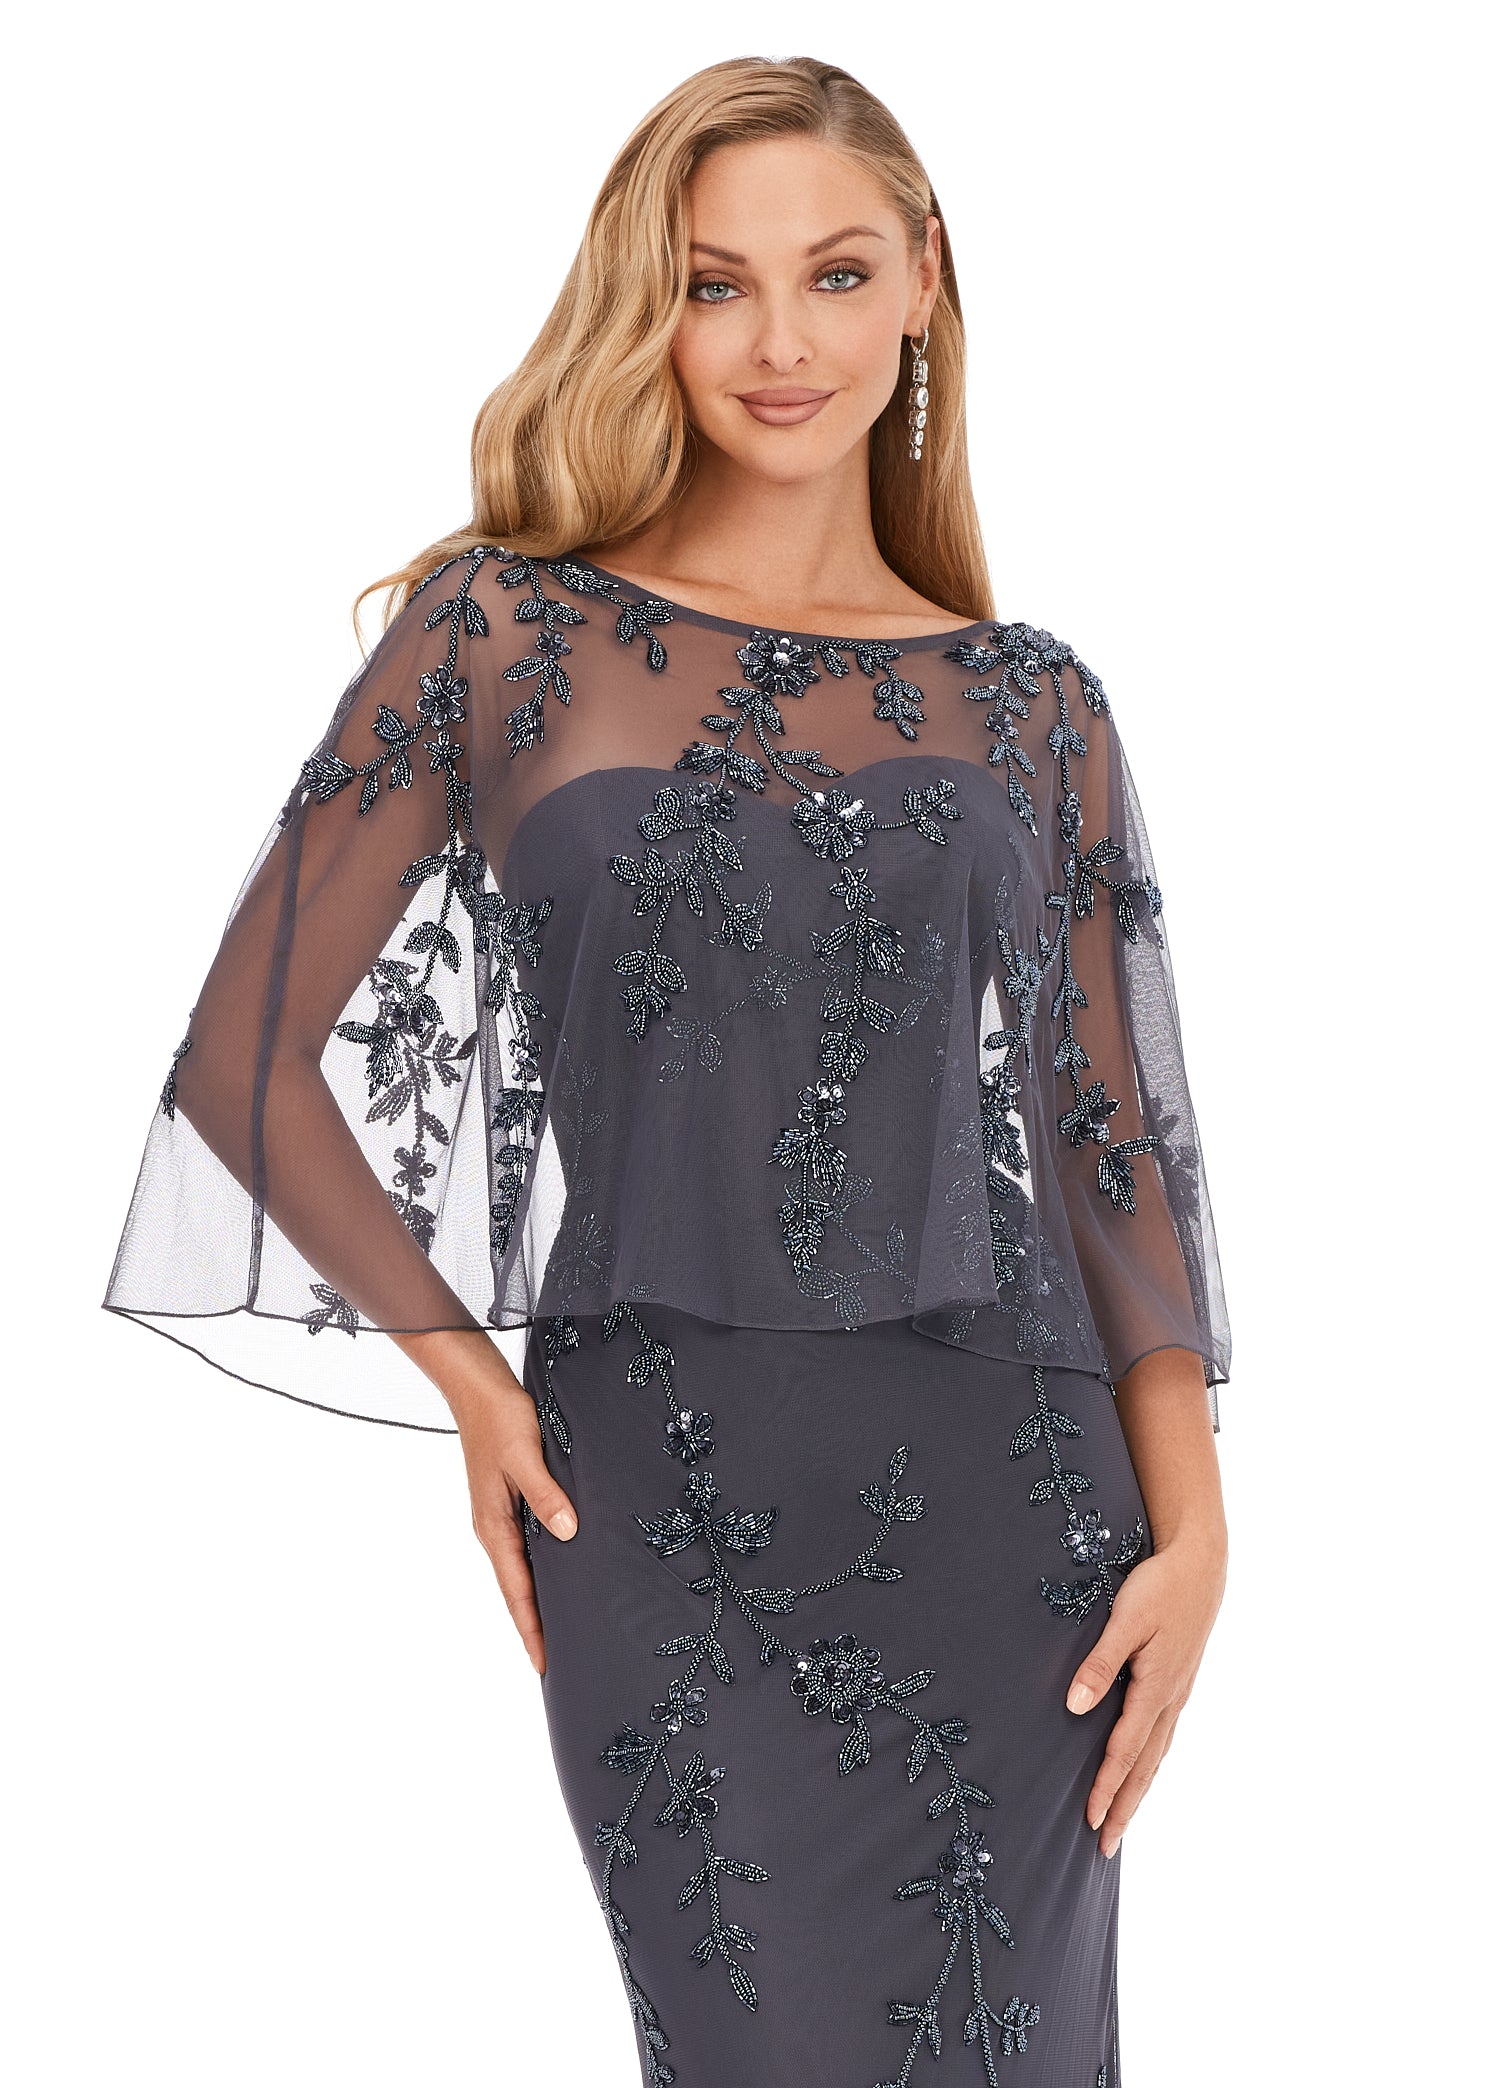 Ashley Lauren 11211 Strapless Floral Bead Modif Gown With Detachable Overlay Sweetheart Neckline Evening Gown. Dazzle in this sophisticated evening gown. This strapless beaded gown is paired with a light detachable overlay. The gown and overlay are adorned wih a floral beaded motif.